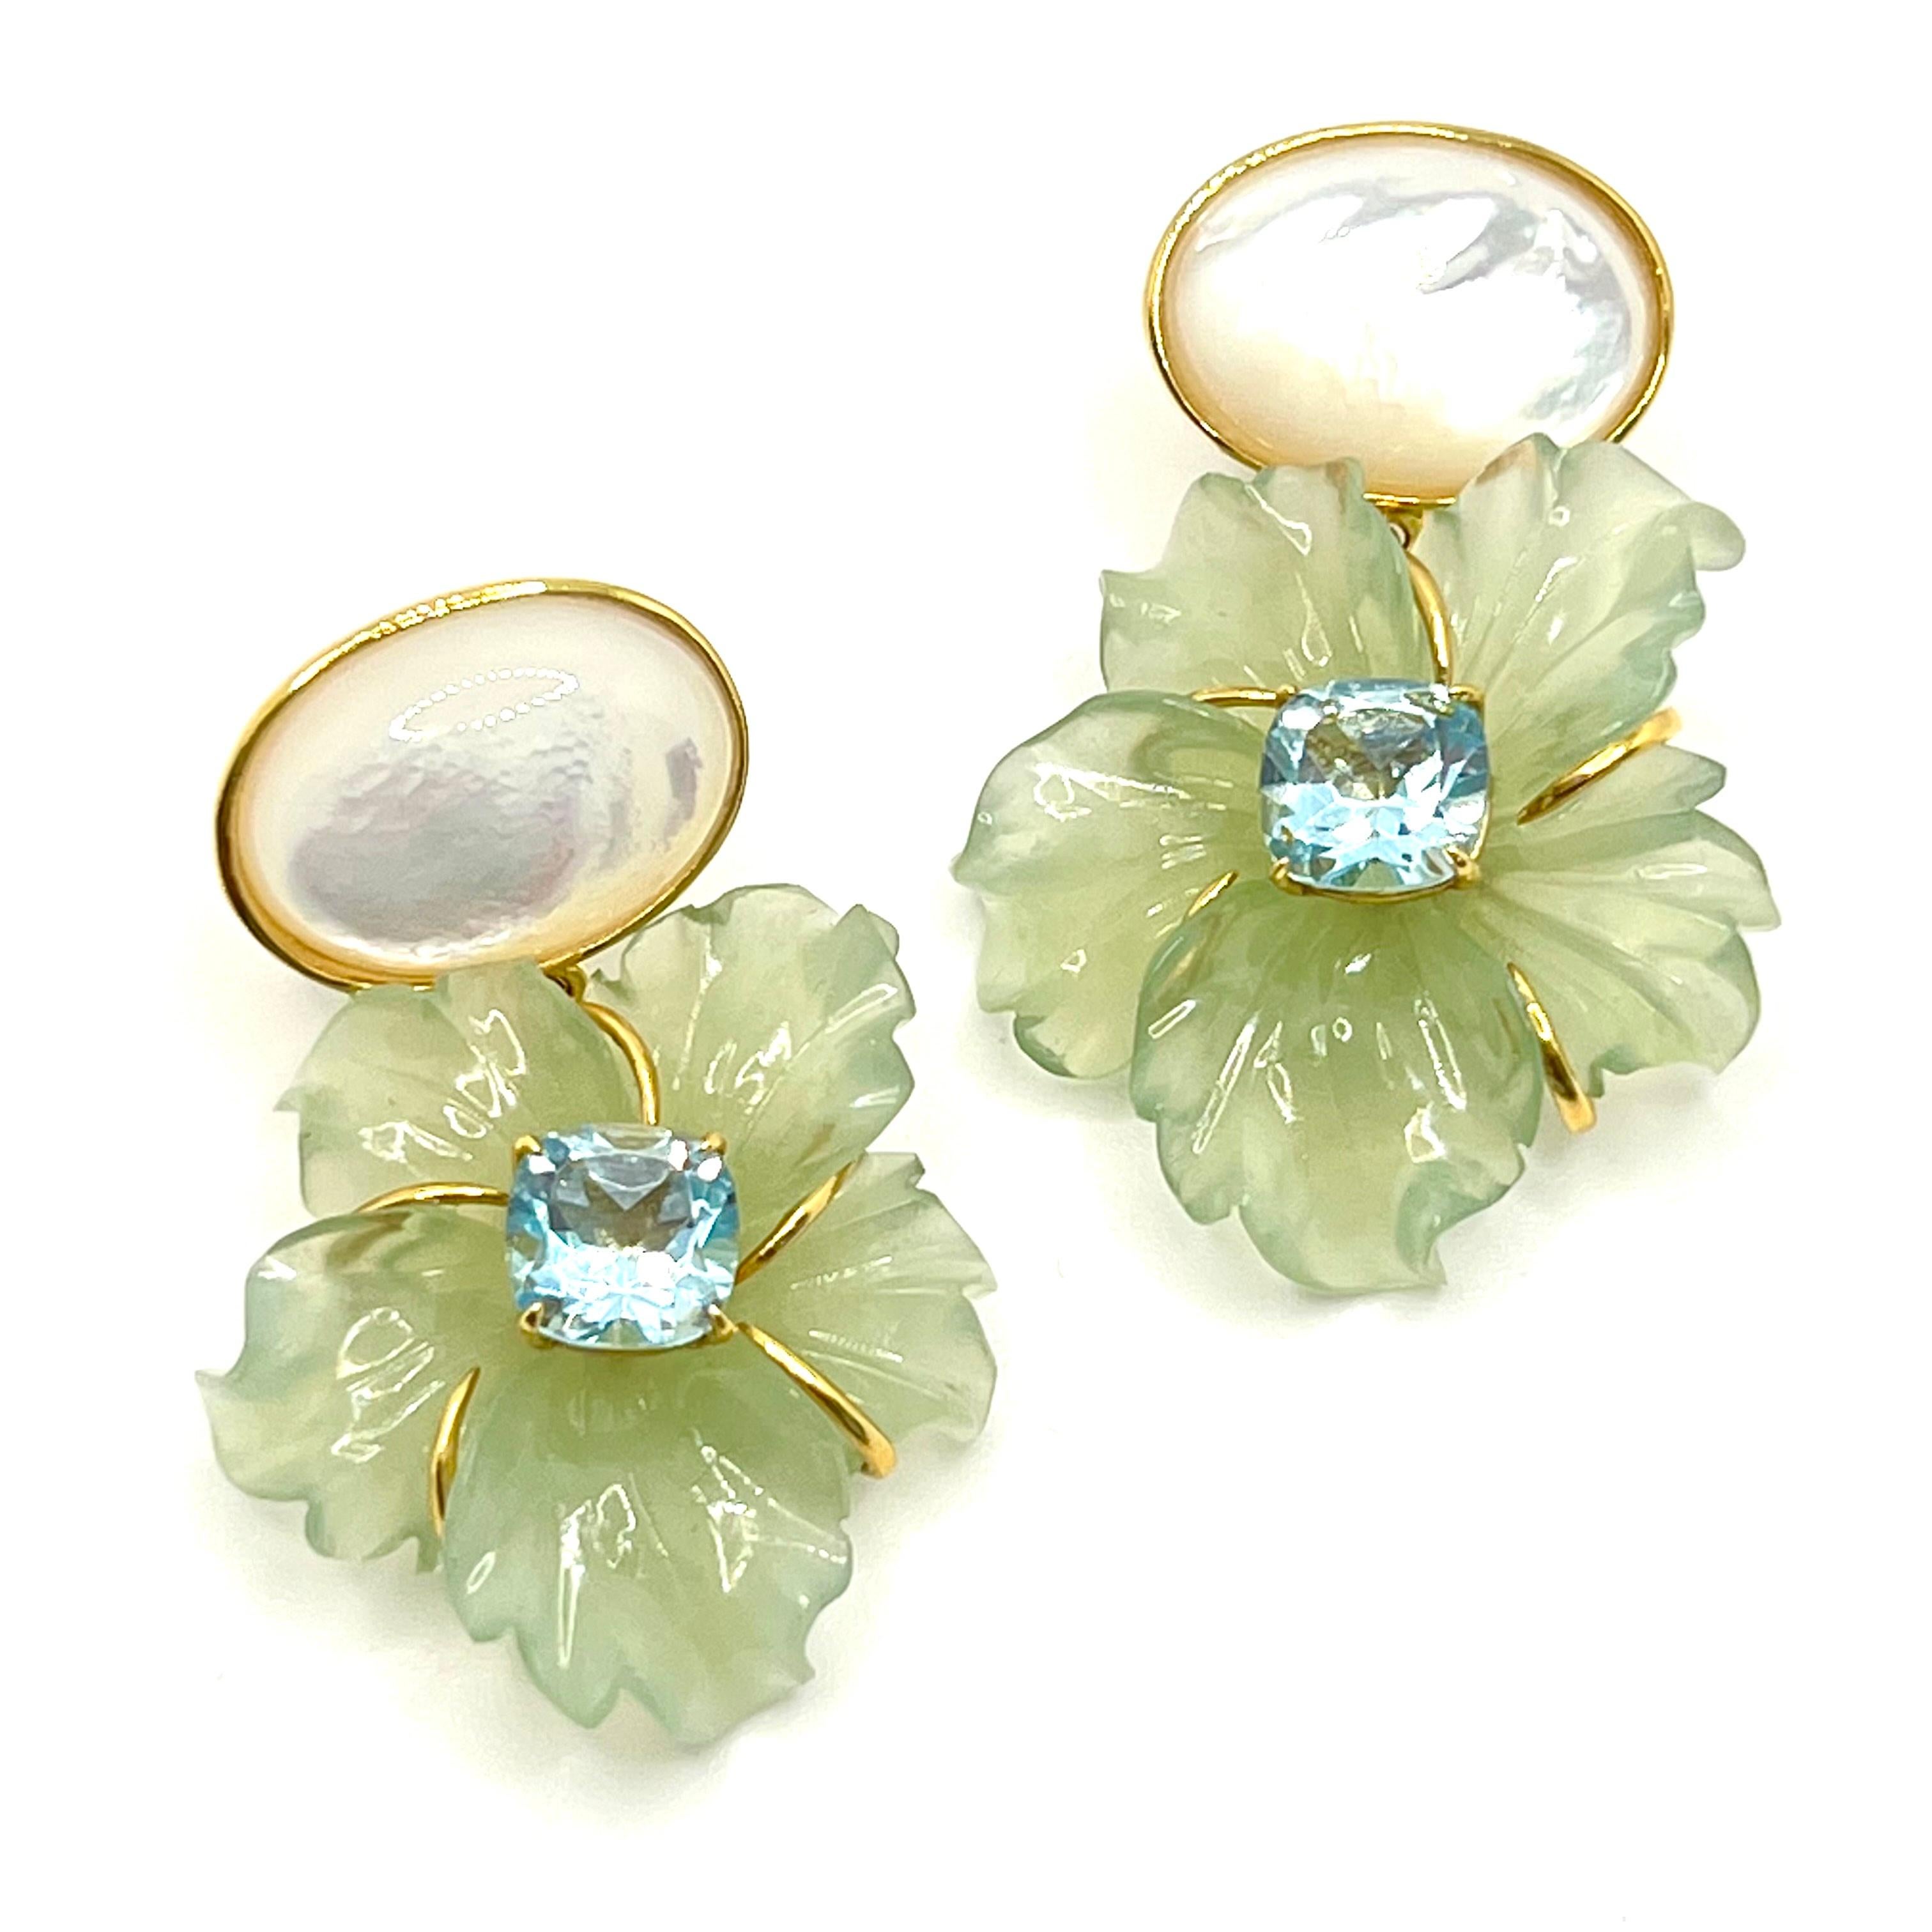 Artisan Stunning Cabochon Mother of Pearl and Carved Serpentine Flower Drop Earrings For Sale